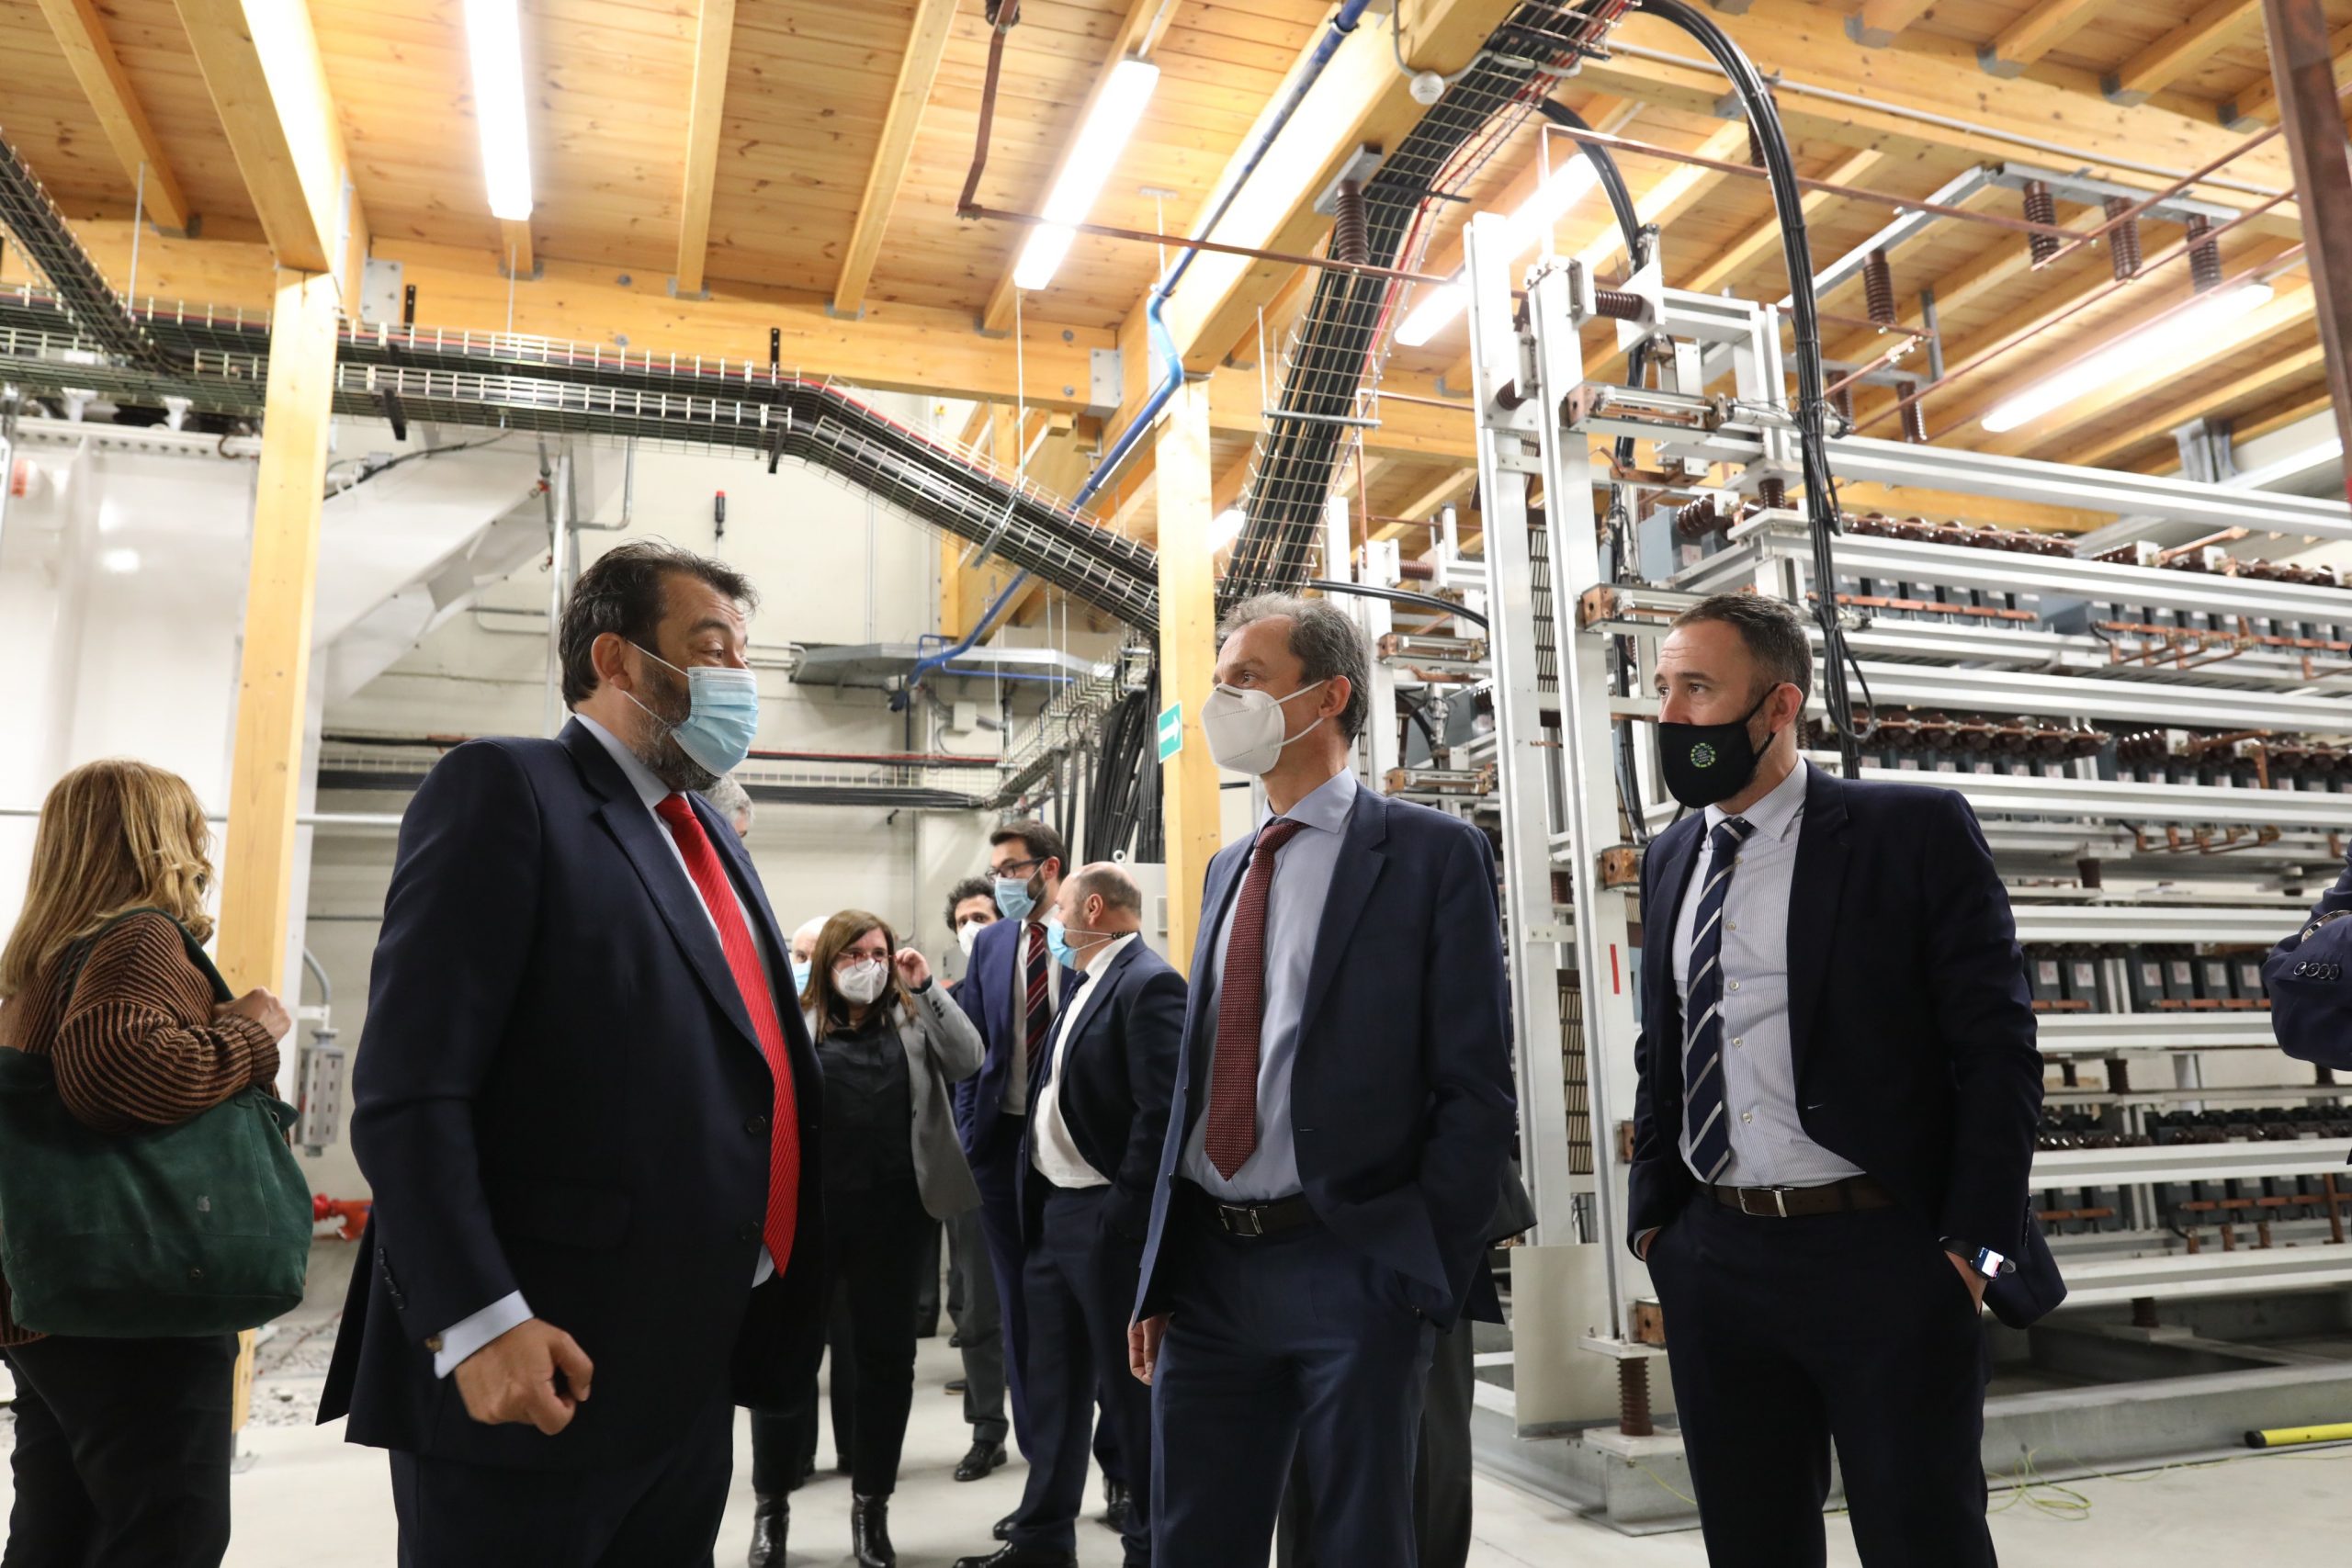 The Spanish Minister for Science and Innovation, Pedro Duque, pays a visit to Velatia’s premises